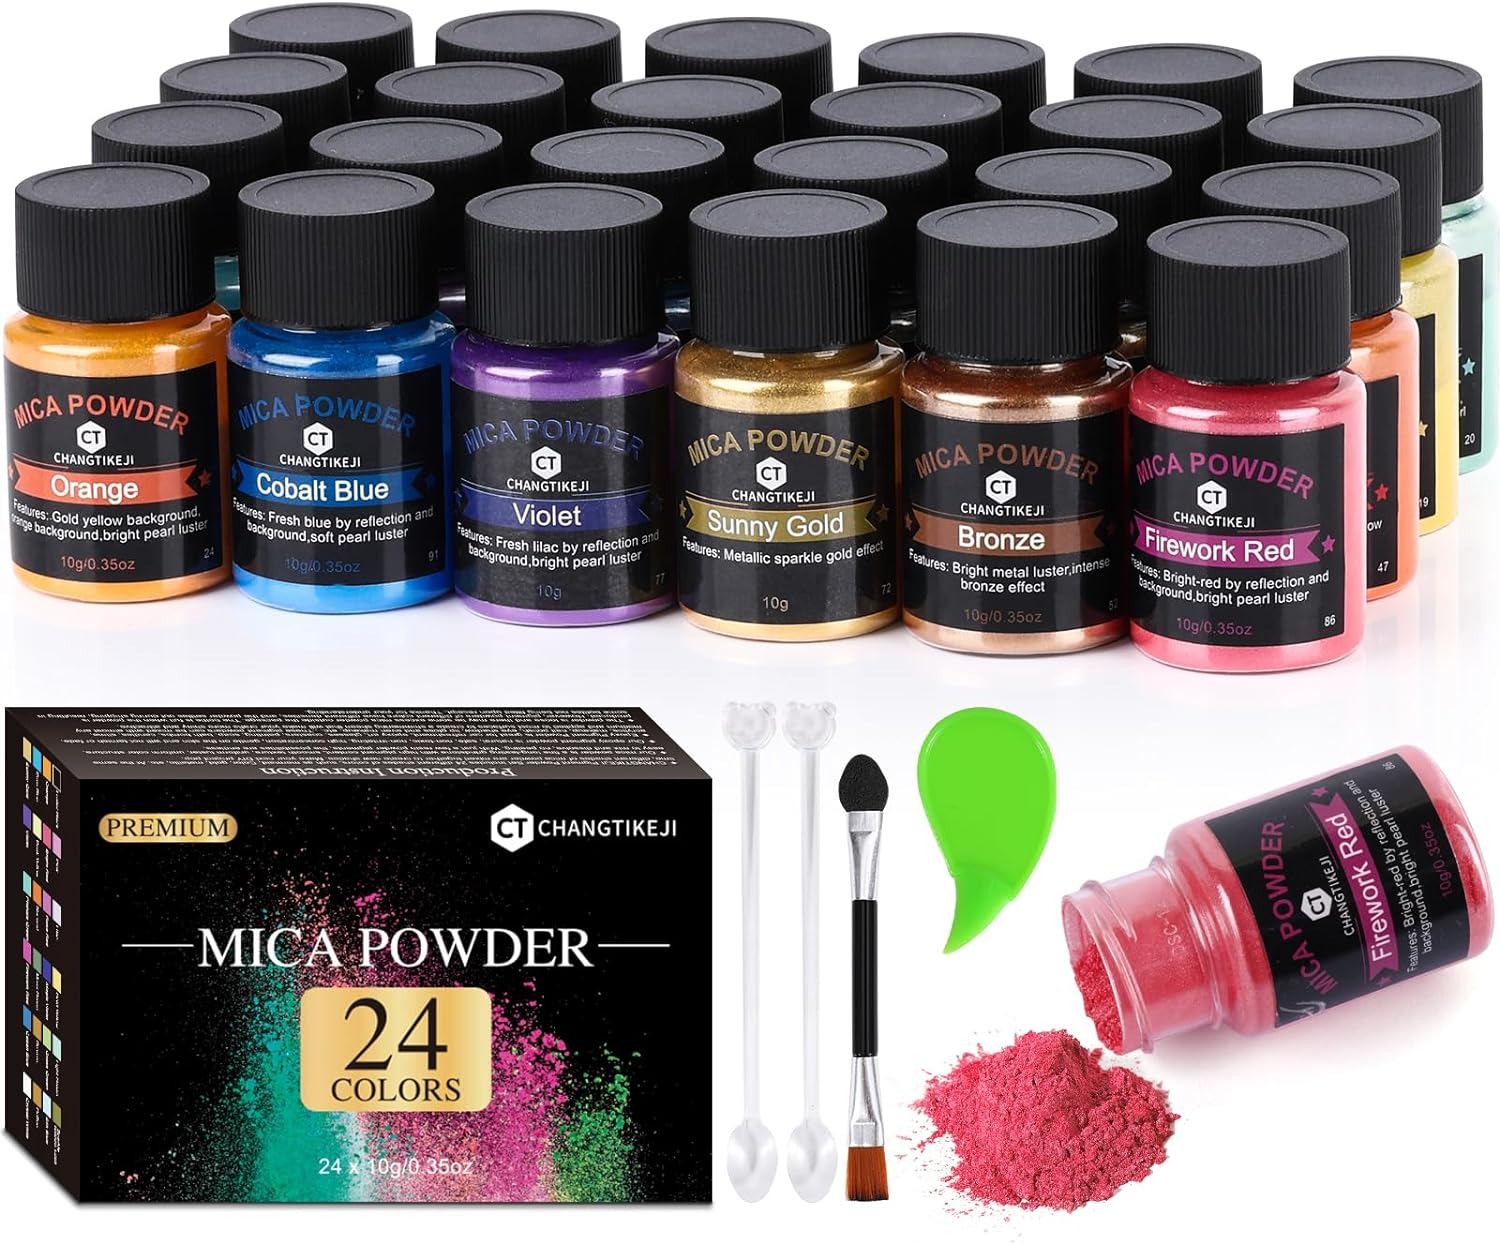 Mica Powder，24 Colors - 10G/Bottle of Natural Pigment Powder for Epoxy Resin